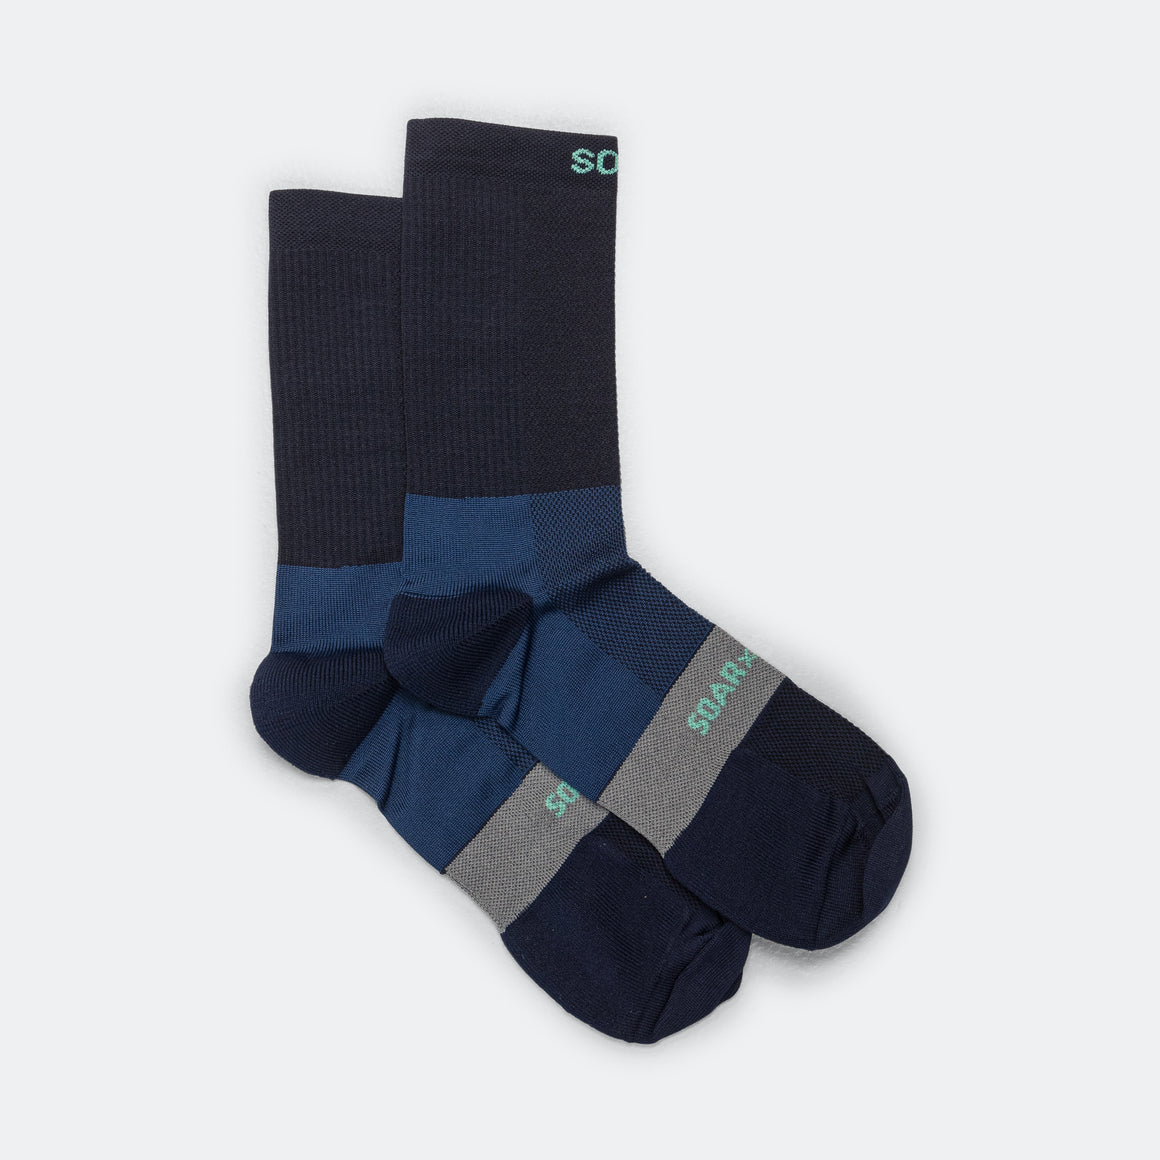 Soar - Crew Sock - Navy - Up There Athletics